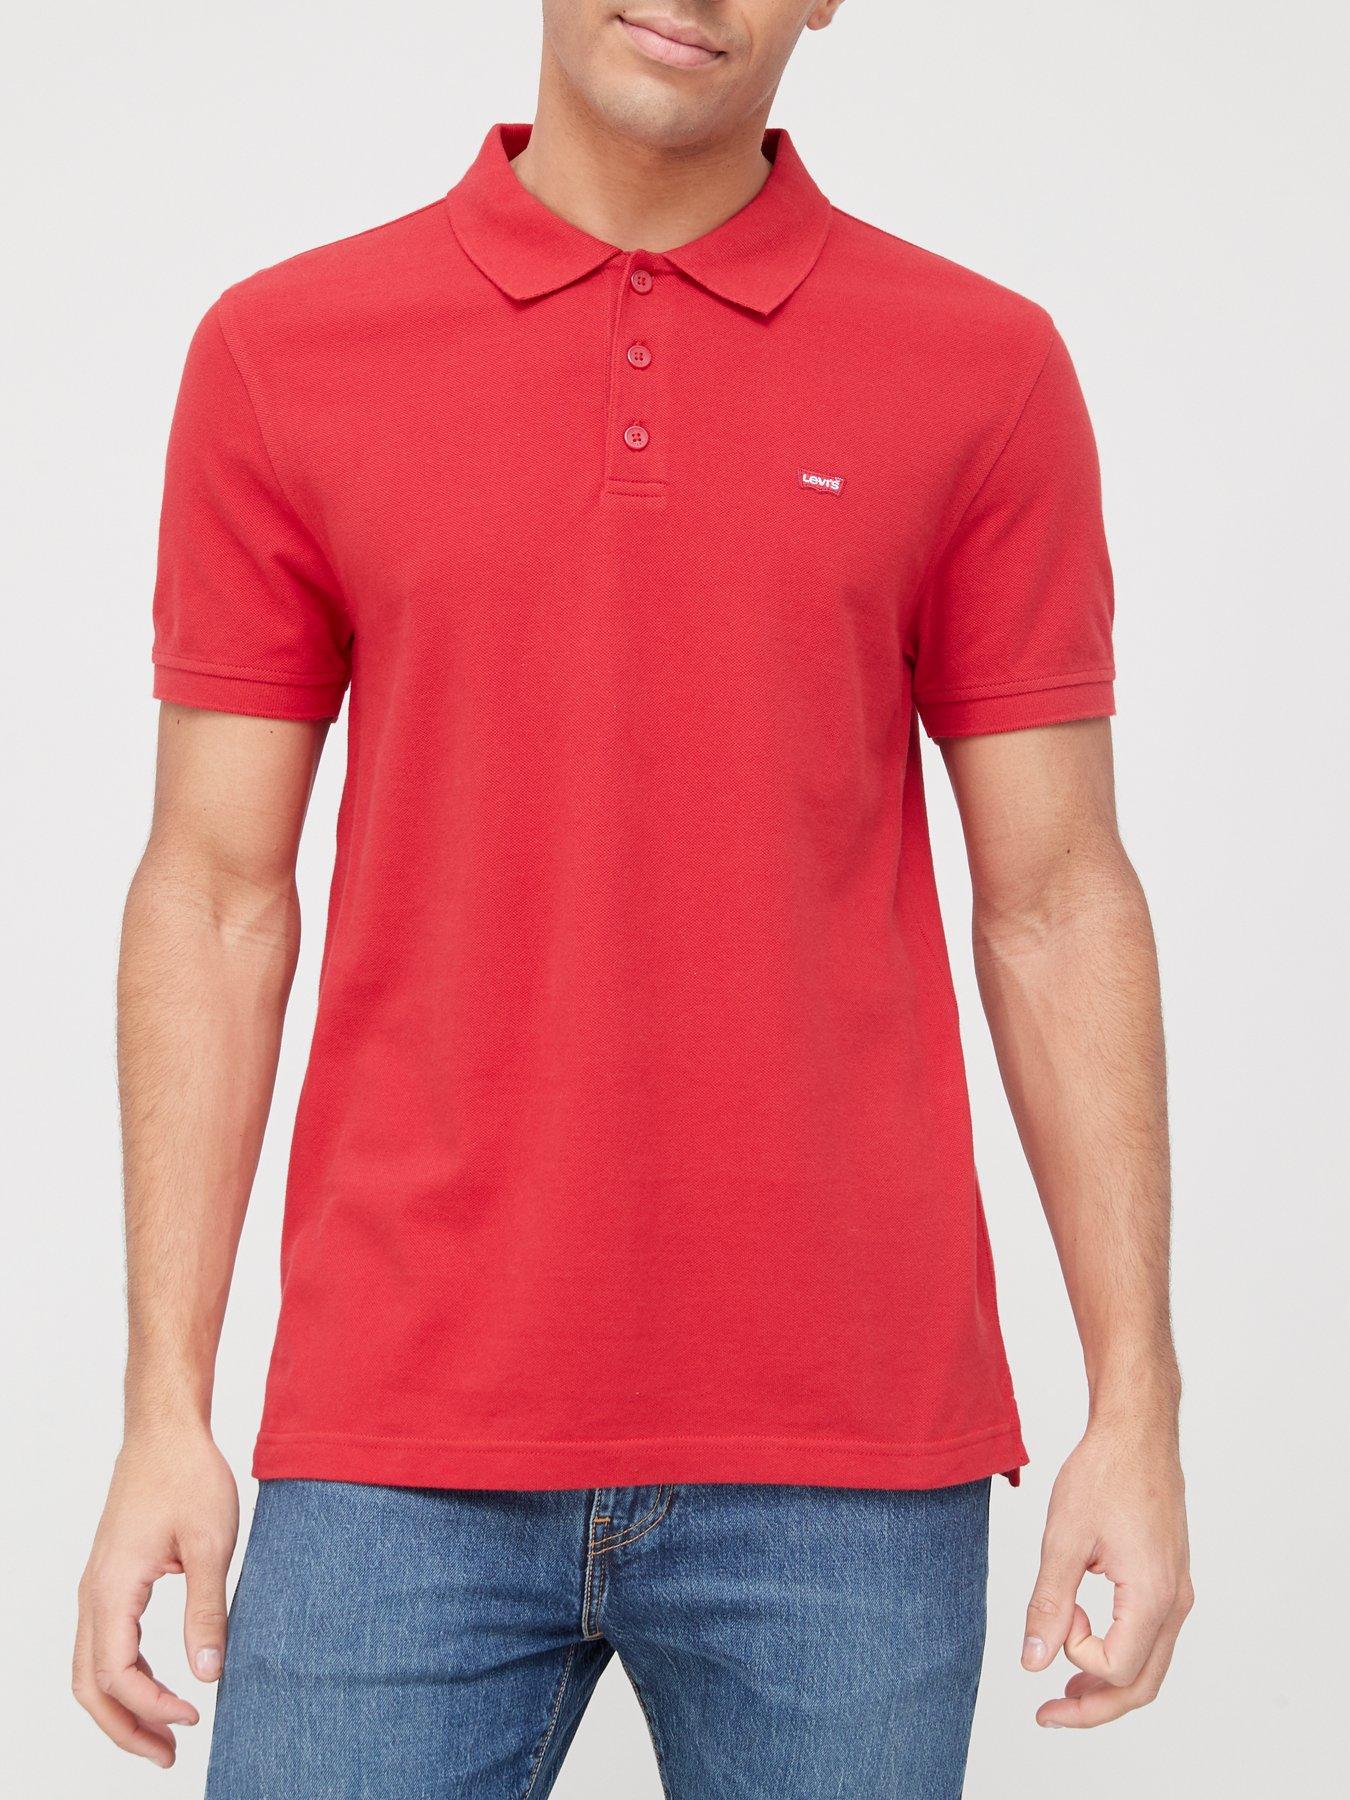 Details about   Levis Jeans Mens Blue Wash/ Red Classic Bat Wing Logo Regular Fit Polo Shirt